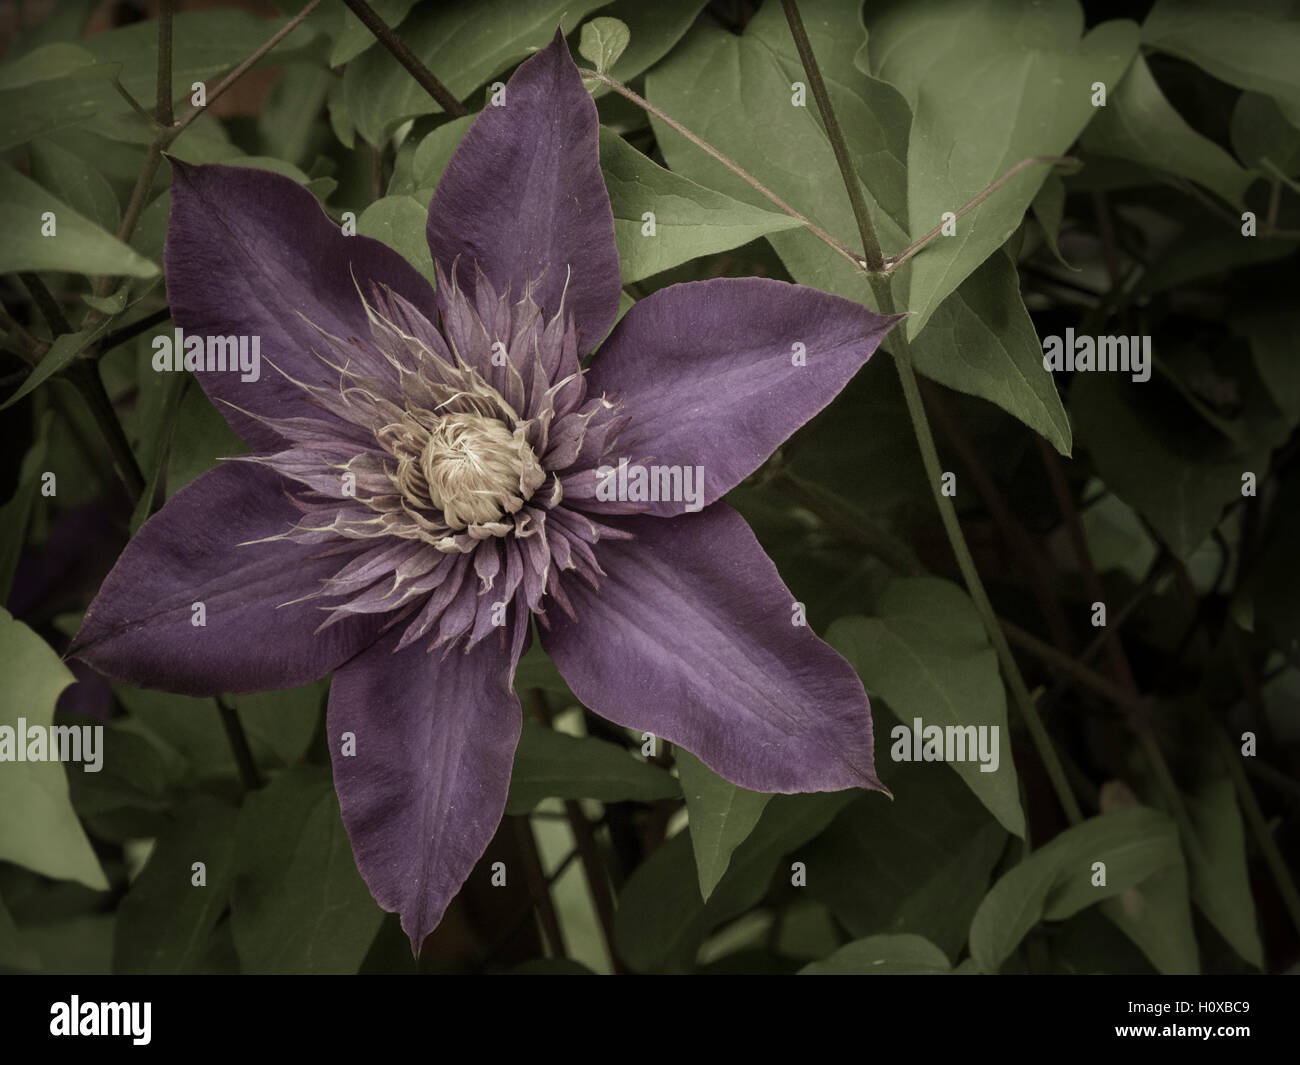 Clematis in bloom Stock Photo